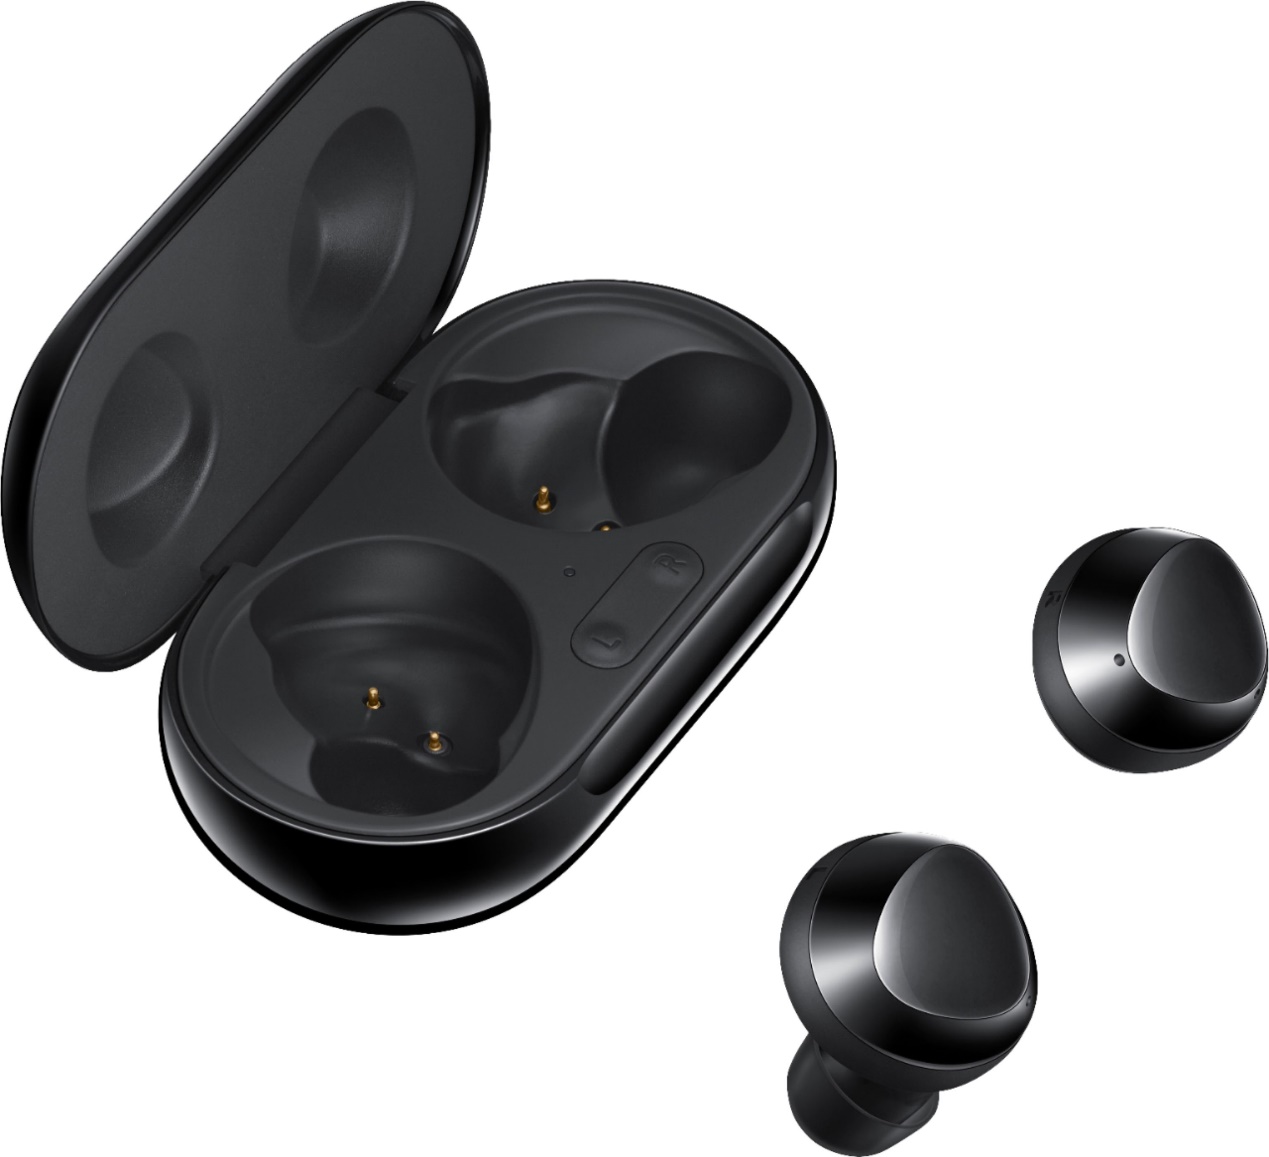 Black AirPods: do they exist and how to buy AirPods or AirPods Pro in black